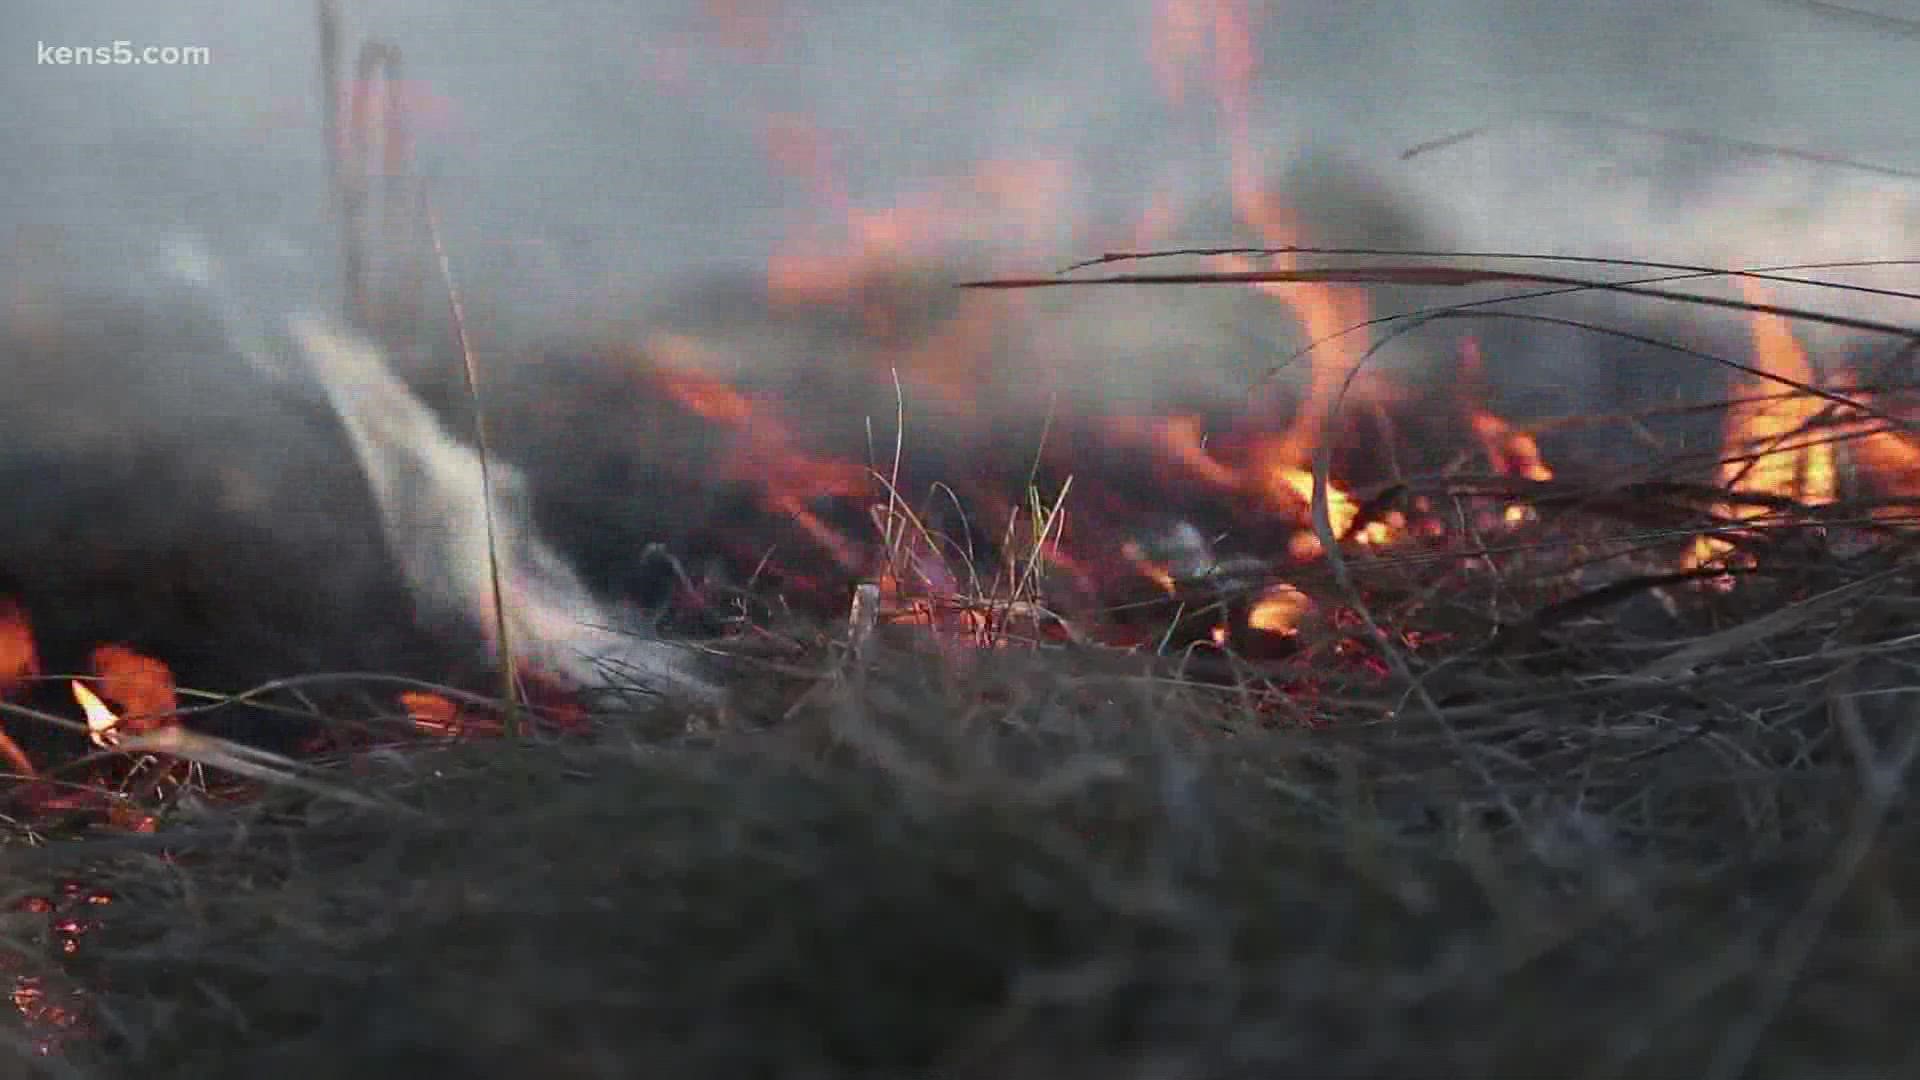 Here's what you can and cannot burn under Bexar County's burn ban.